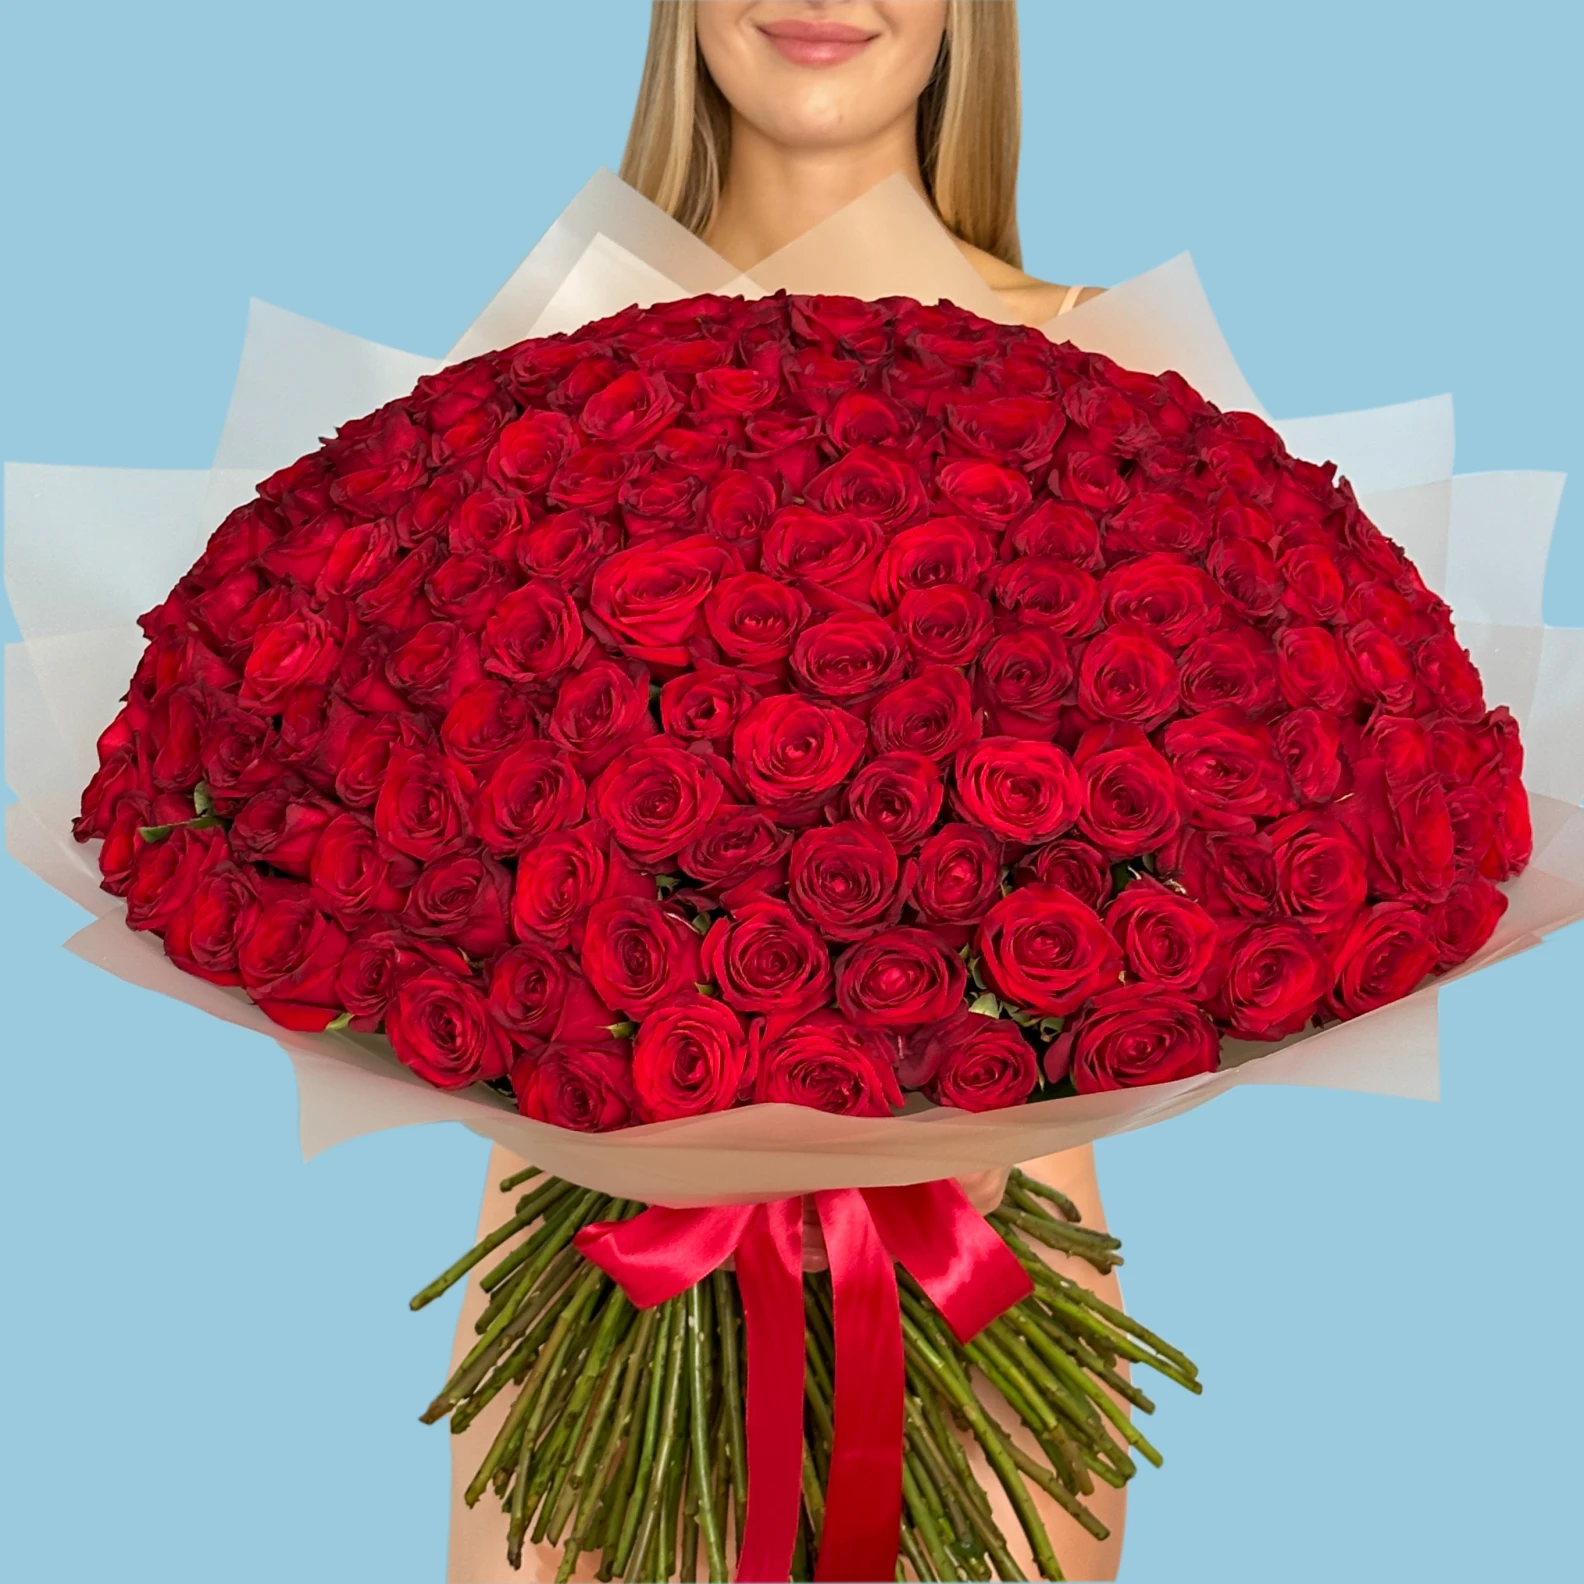 200 Red Roses - image №1